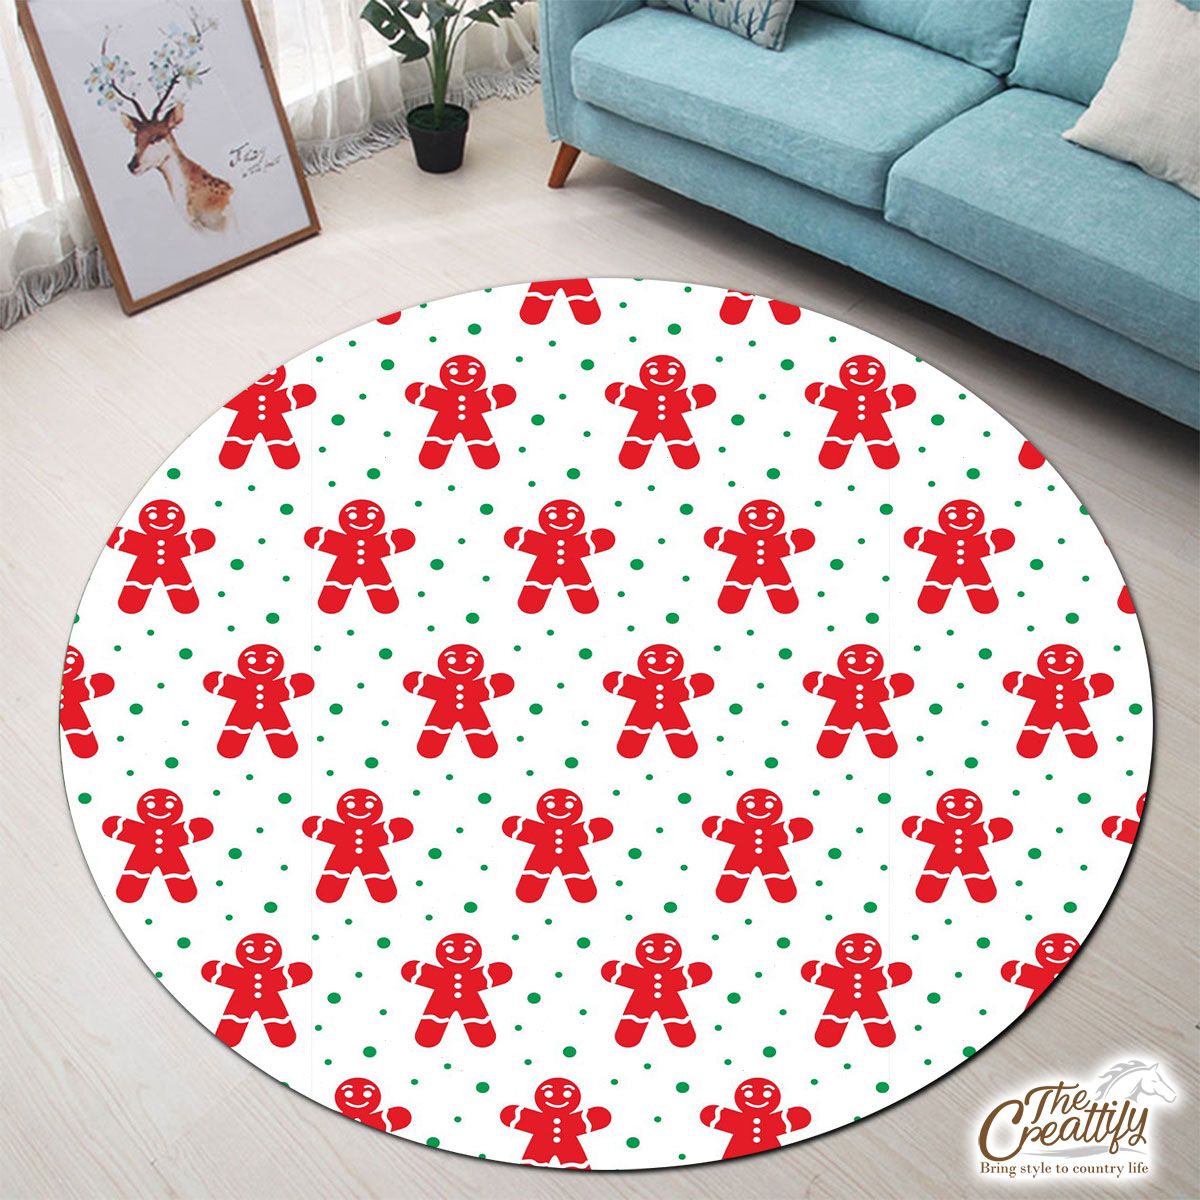 Gingerbread Man Cookies, Christmas Gingerbread Red With Snowflake Background Round Carpet